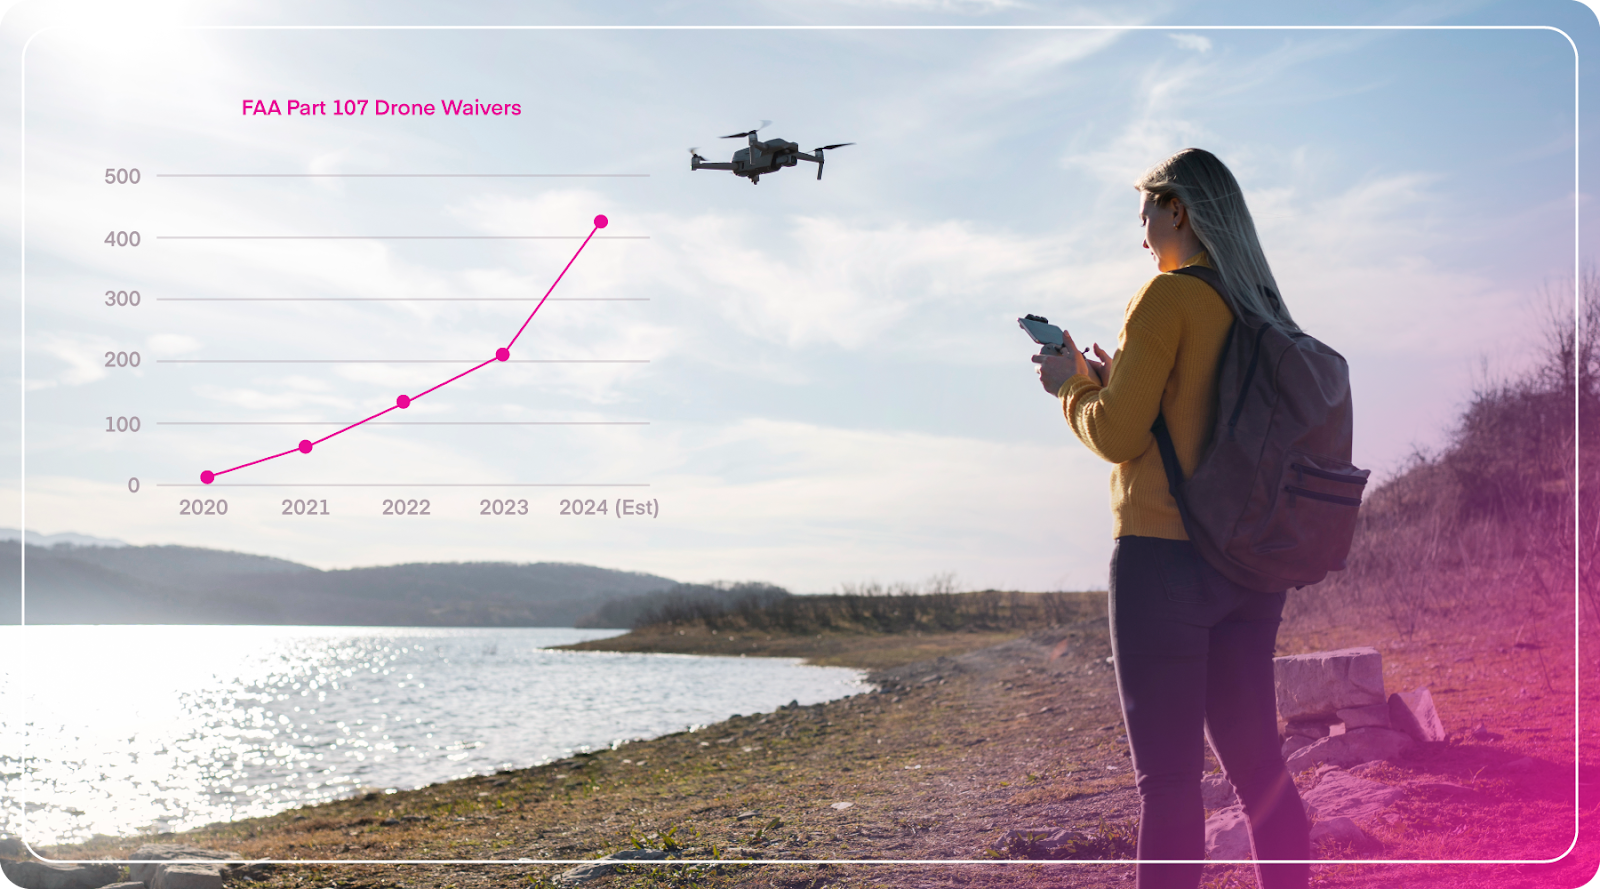 An operator flies a drone over a lake with a graph of drove waivers superimposed.